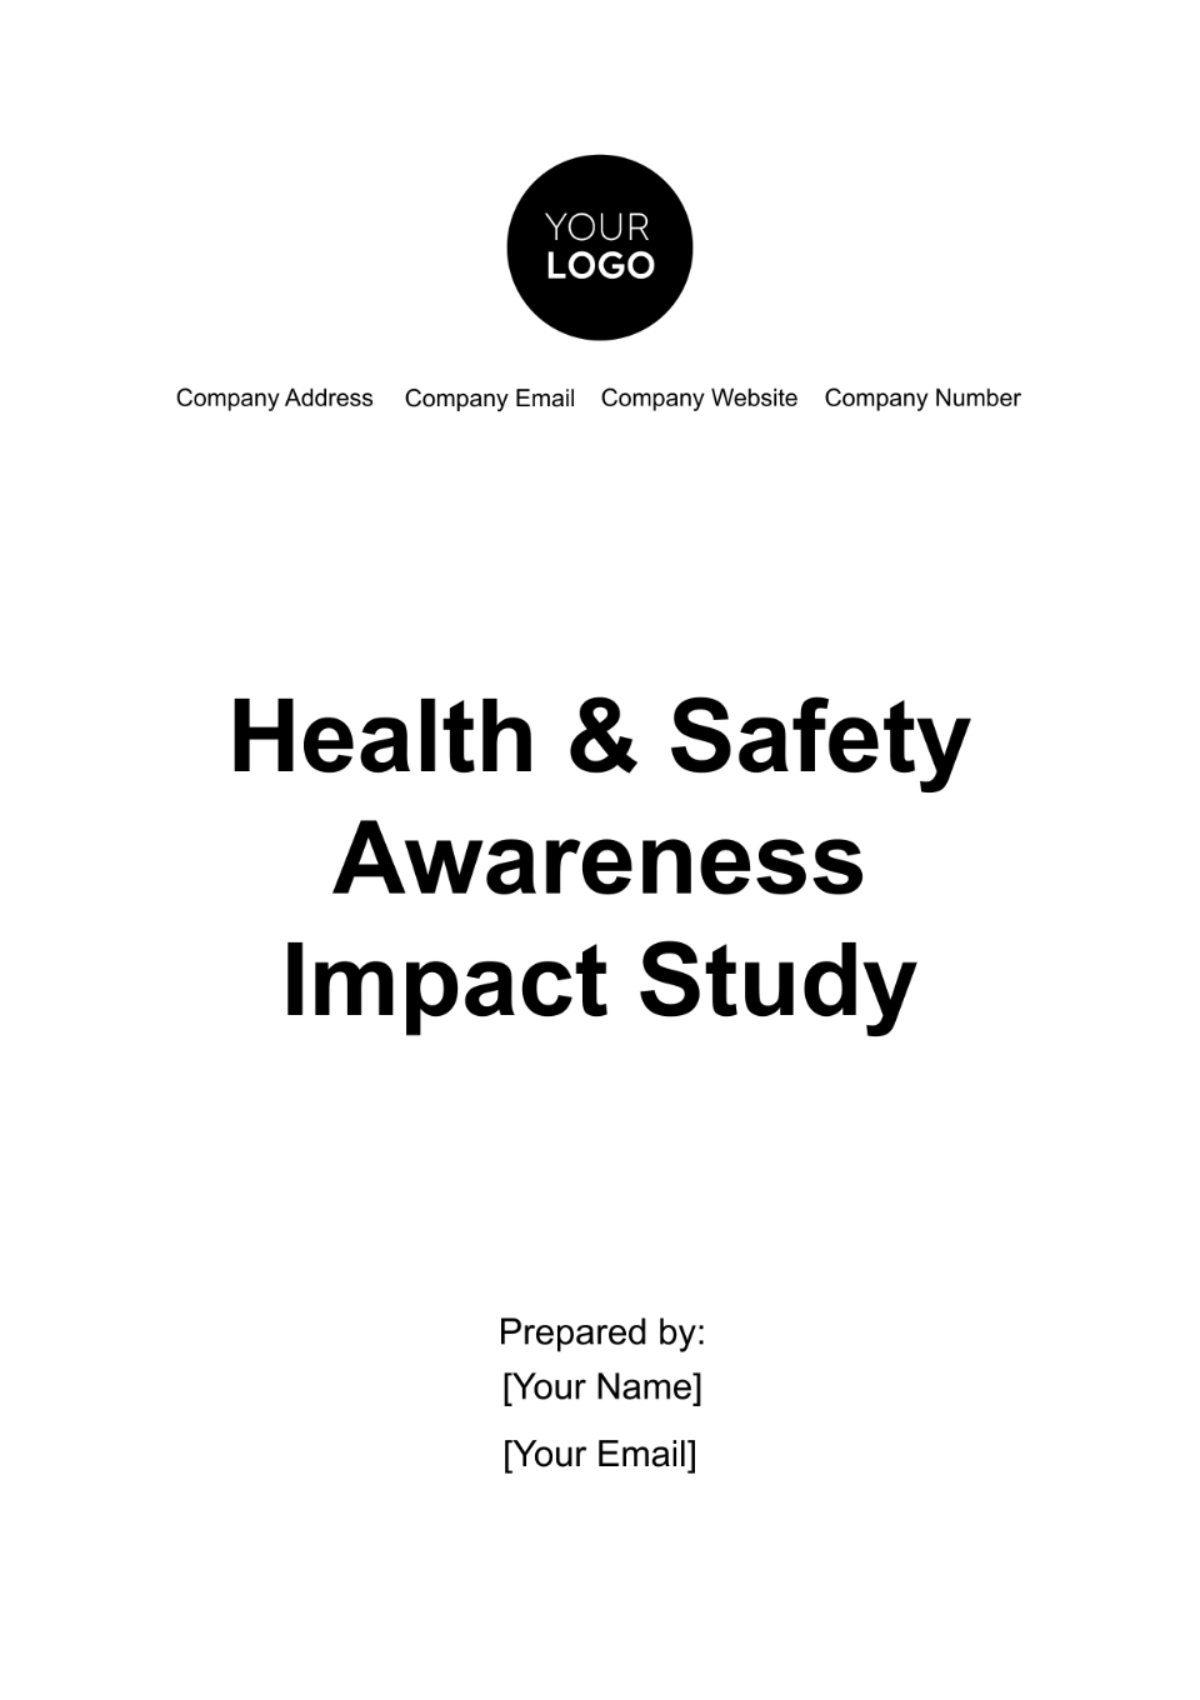 Health & Safety Awareness Impact Study Template